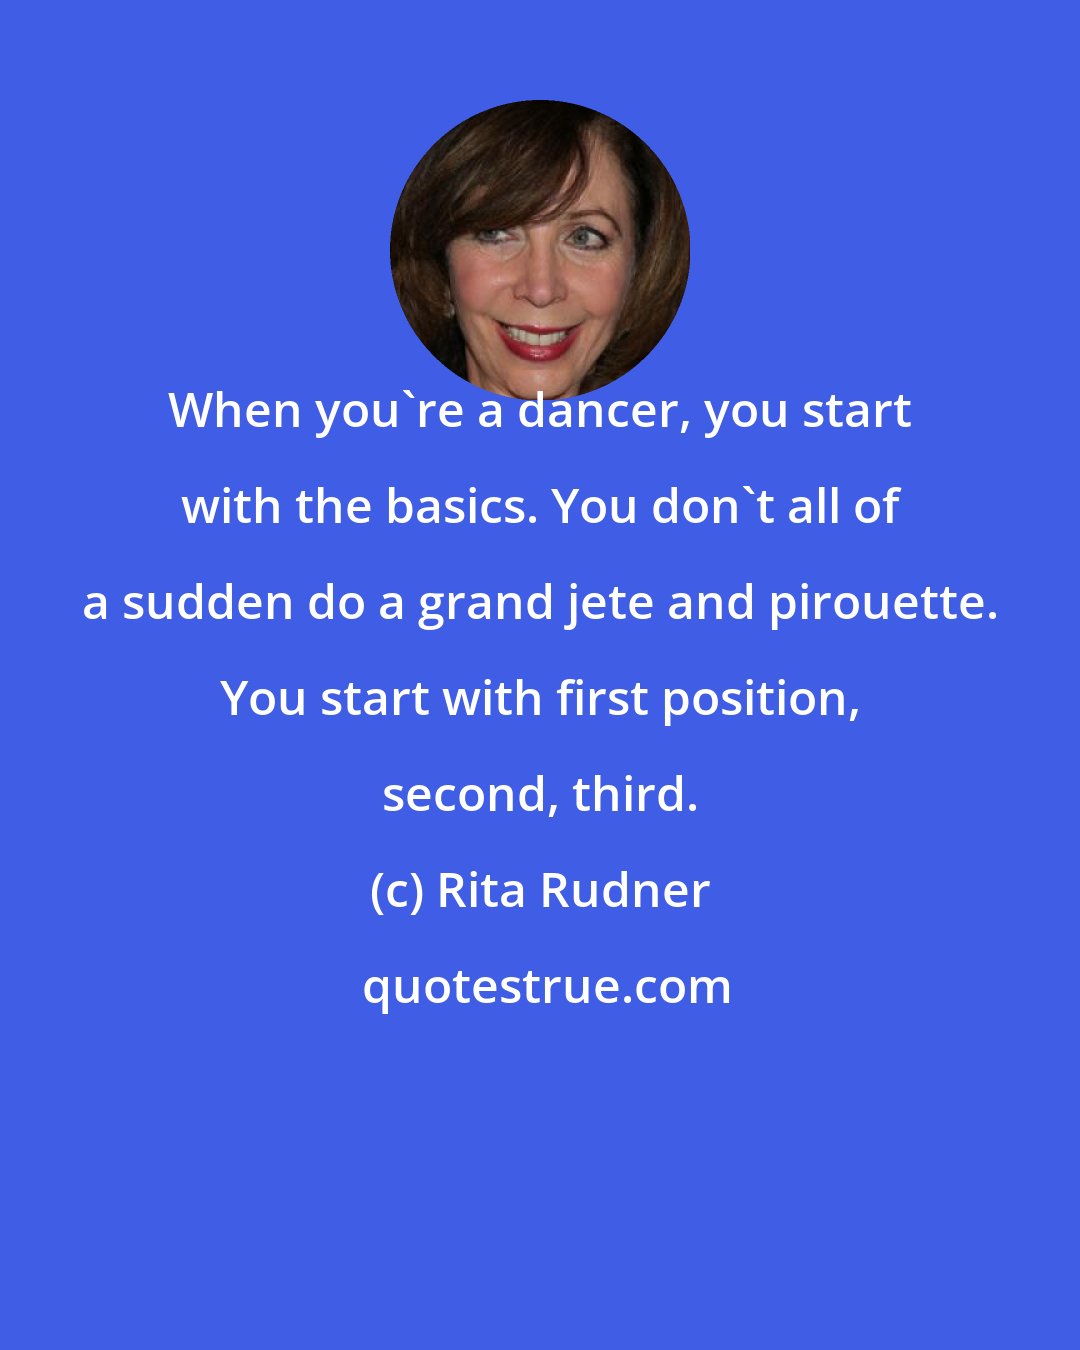 Rita Rudner: When you're a dancer, you start with the basics. You don't all of a sudden do a grand jete and pirouette. You start with first position, second, third.